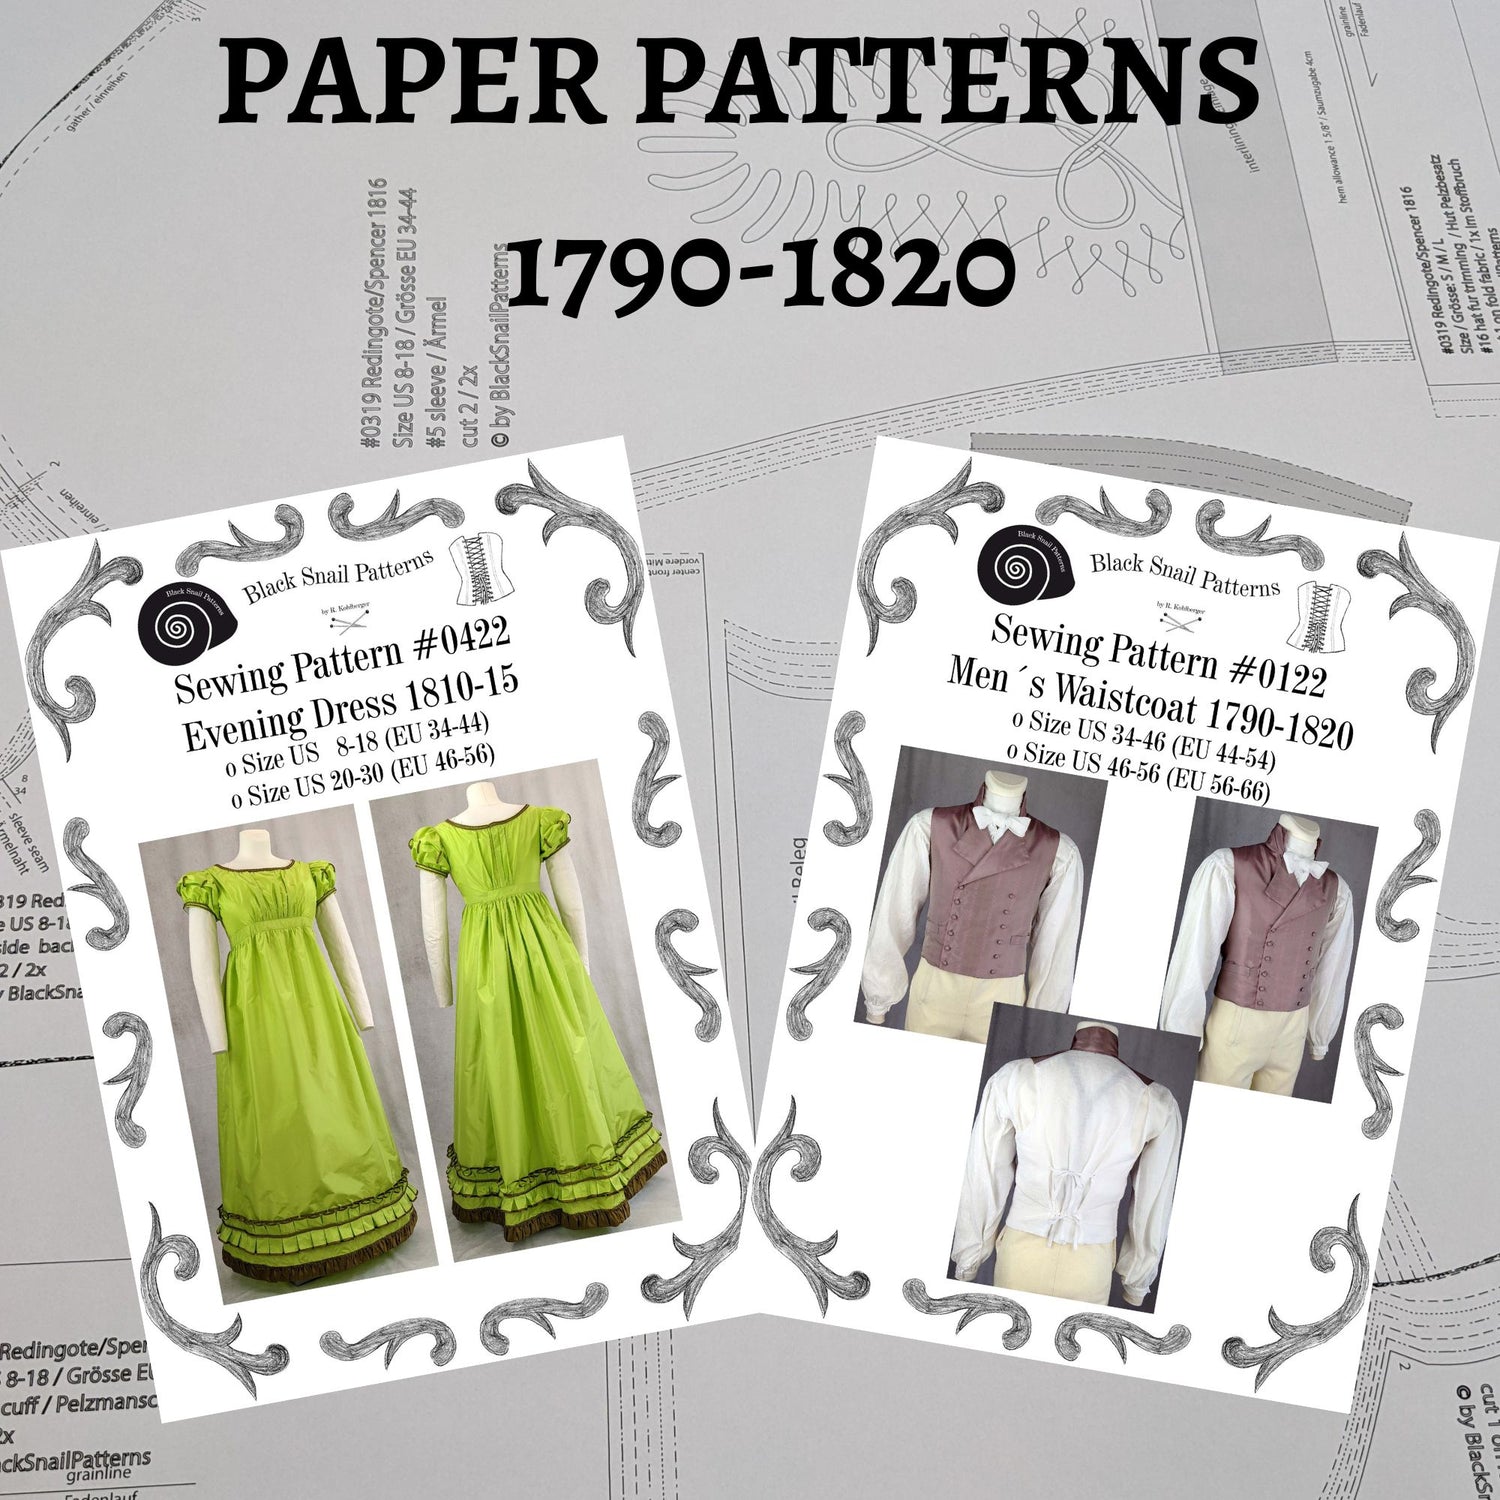 Paper pattern 1790-1820 for Women and Men